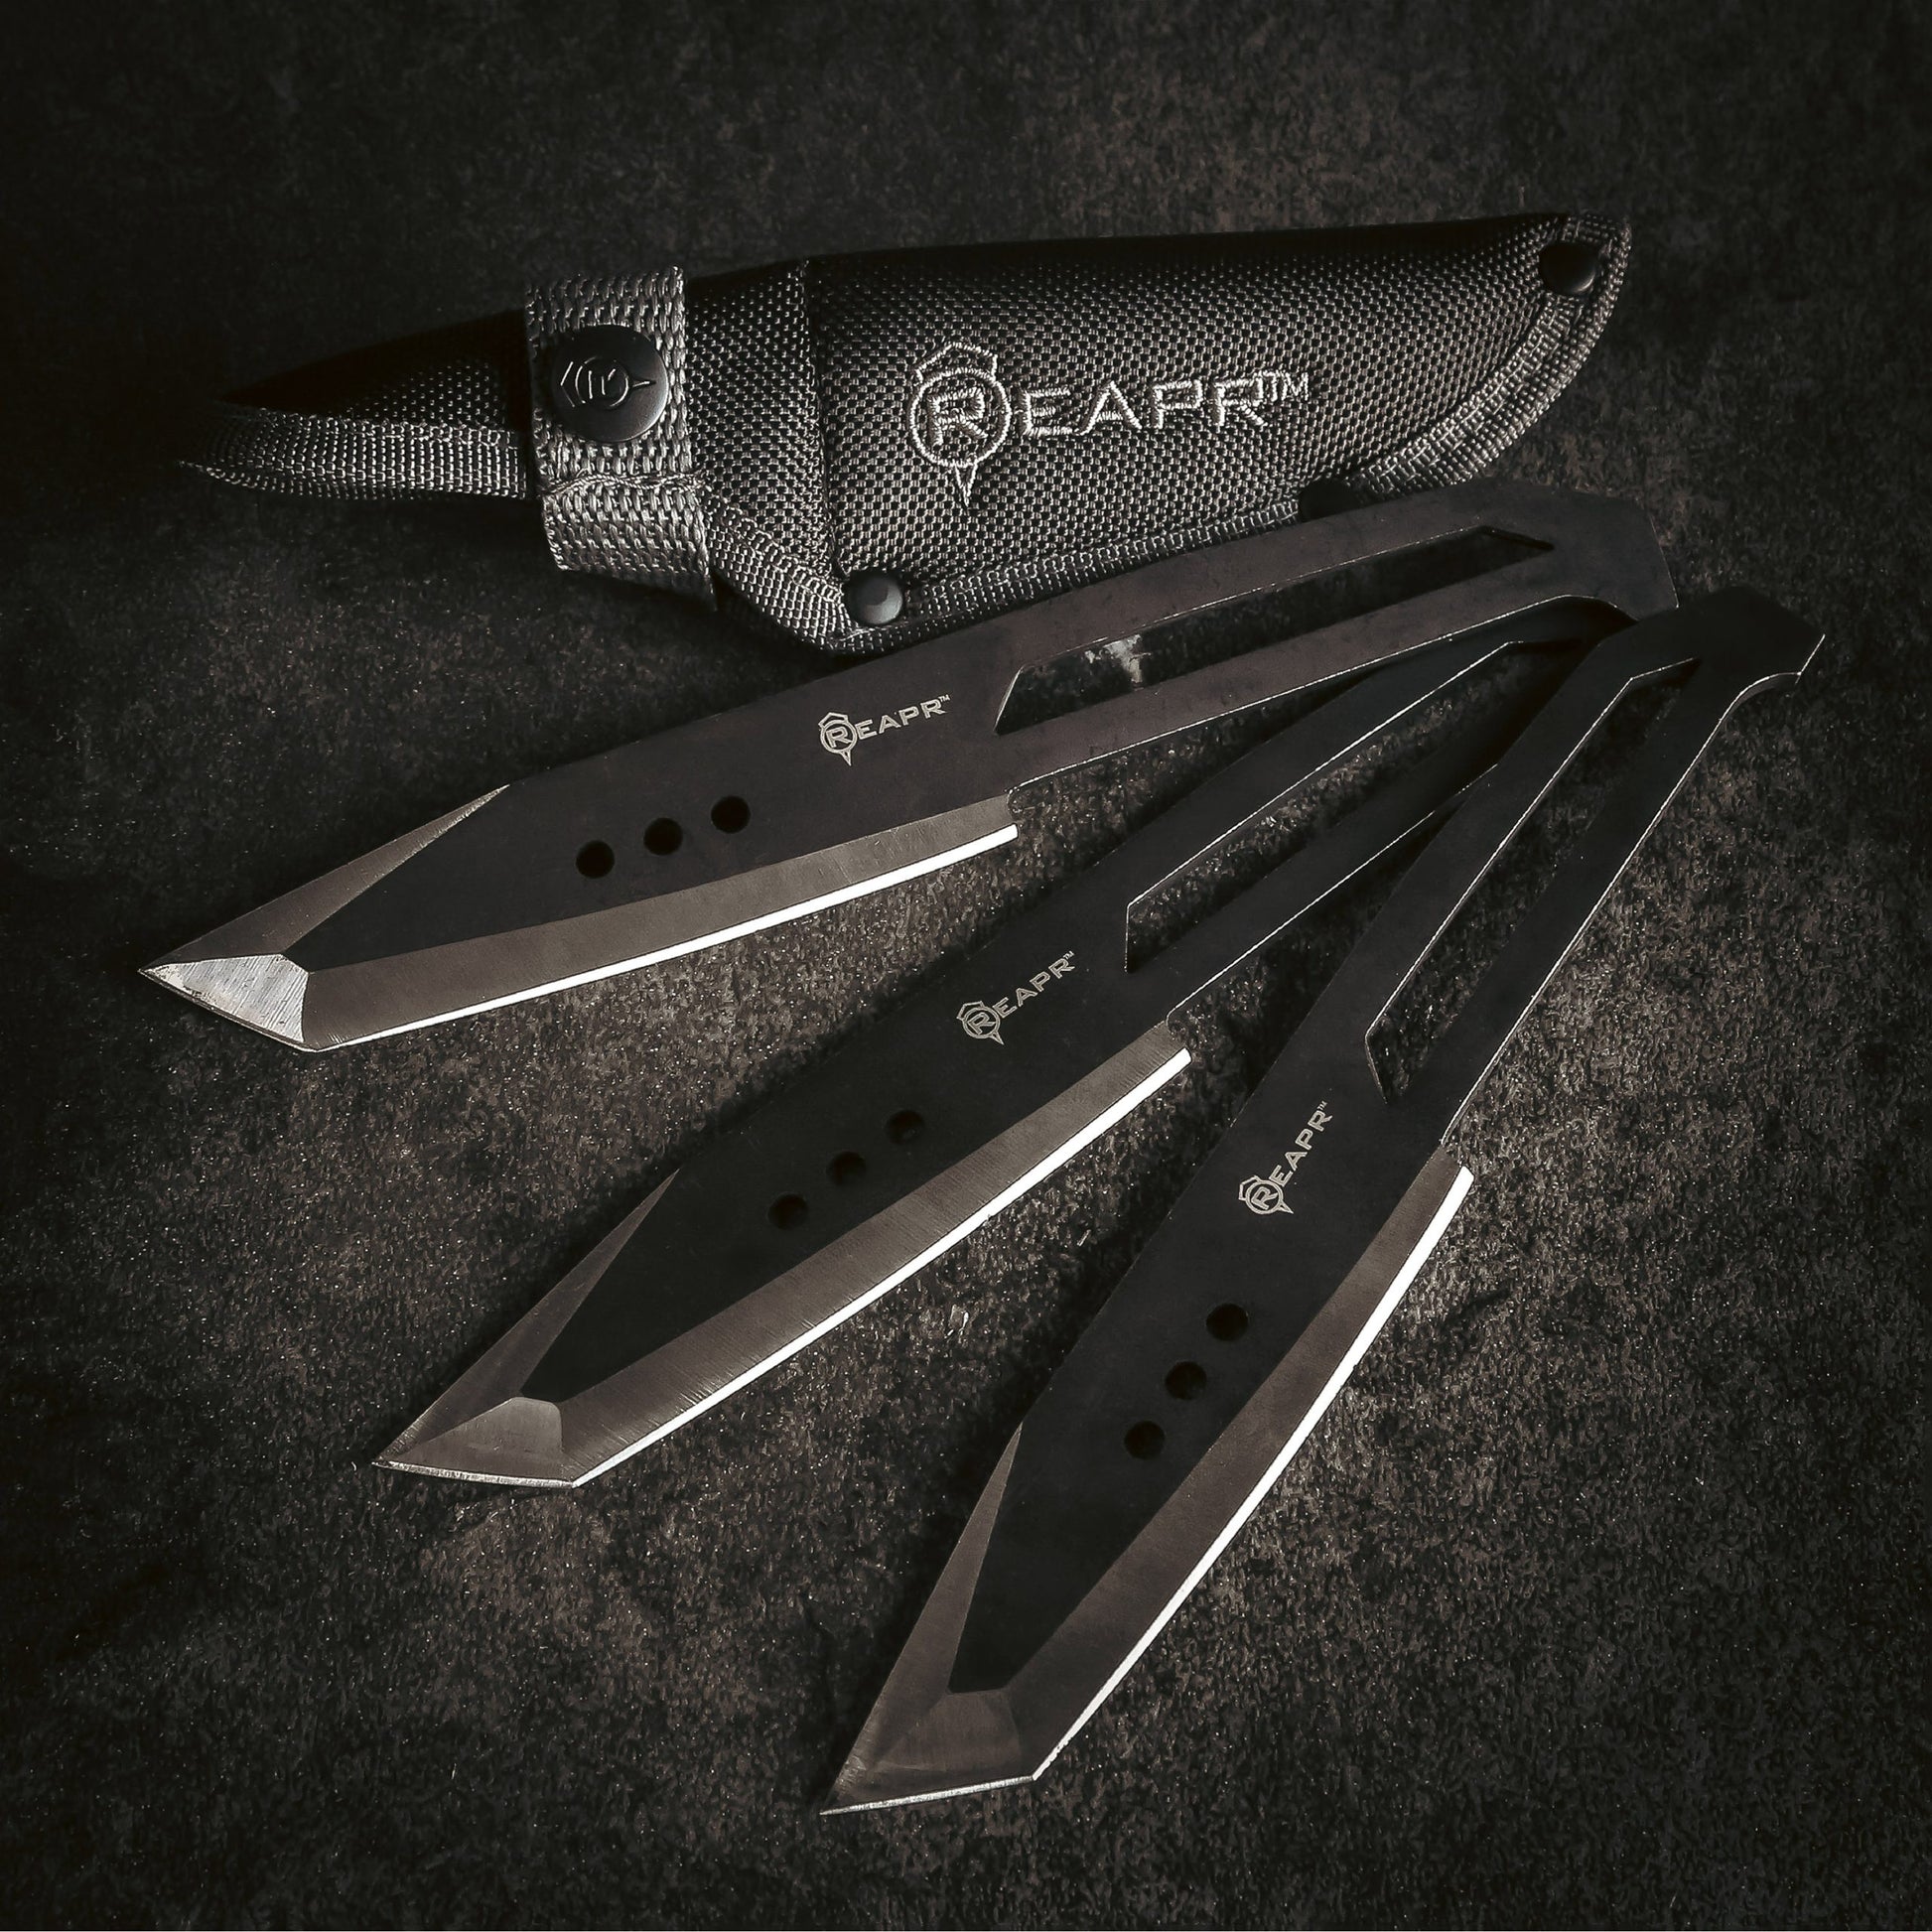 Hit the bullseye every time with these perfectly-balanced throwers. The Reapr 3 Piece Chuk Knives set is ideal for camping, parties, barbecues, and other outdoor activities. www.defenceqstore.com.au